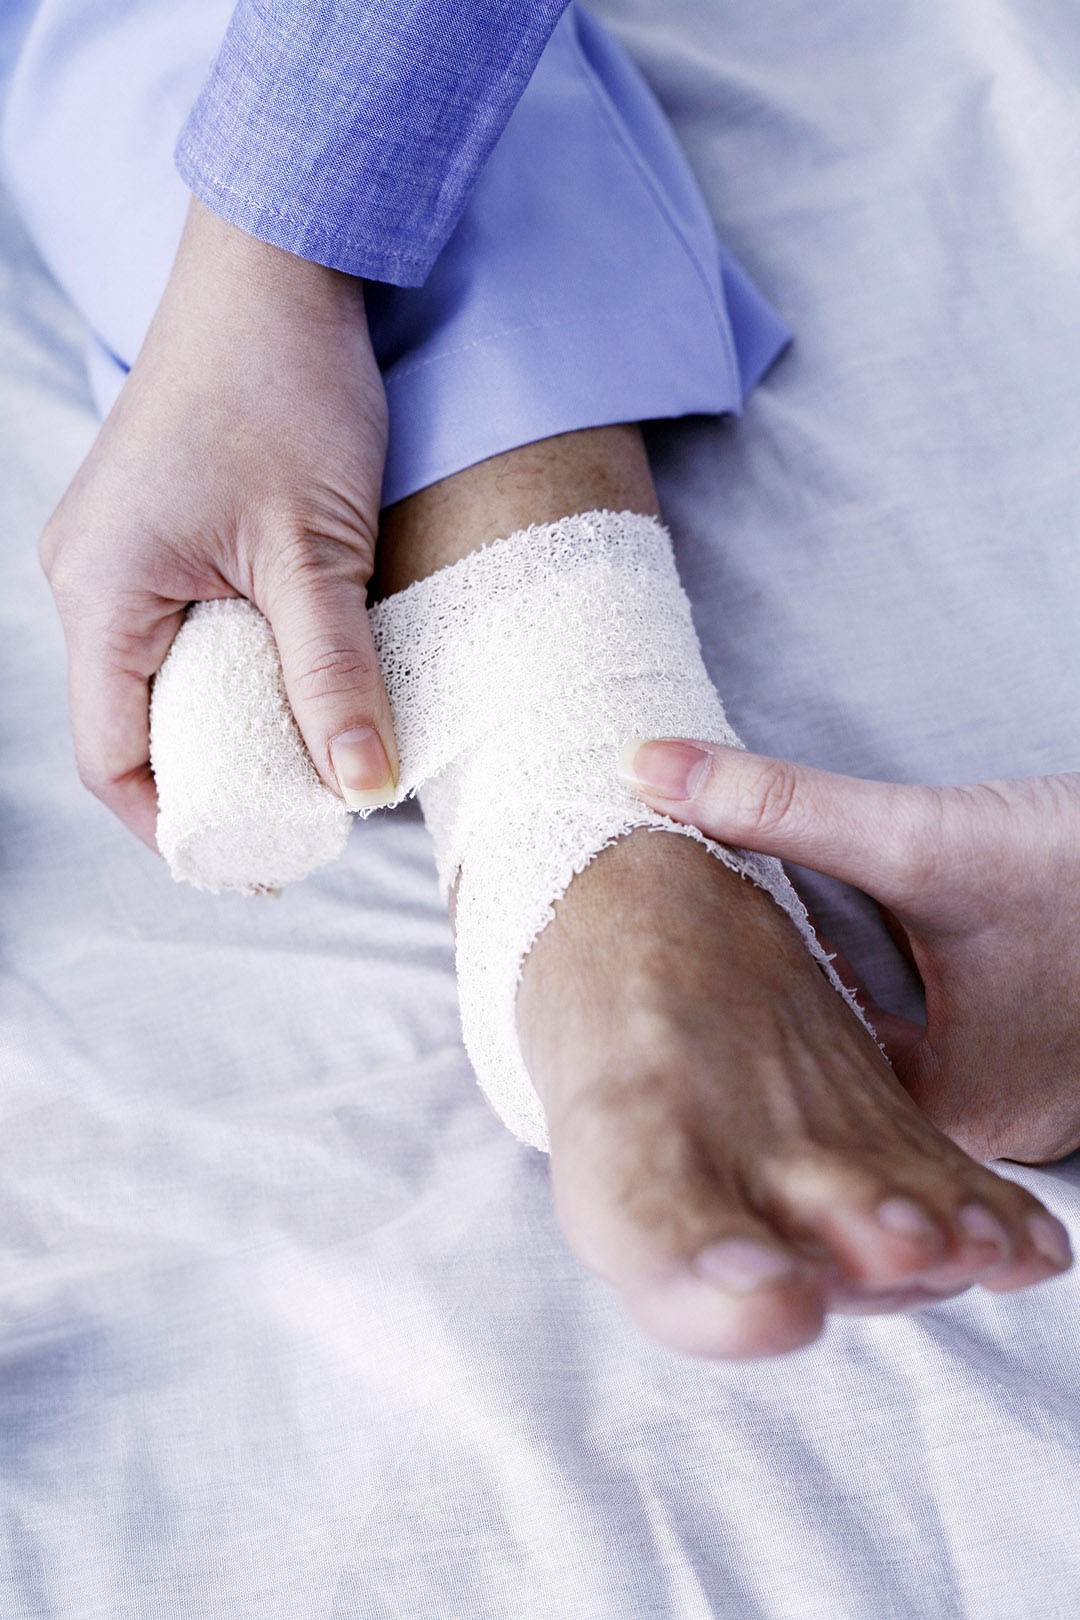 Optimize Your Wound Care: A Checklist For Effective Operations